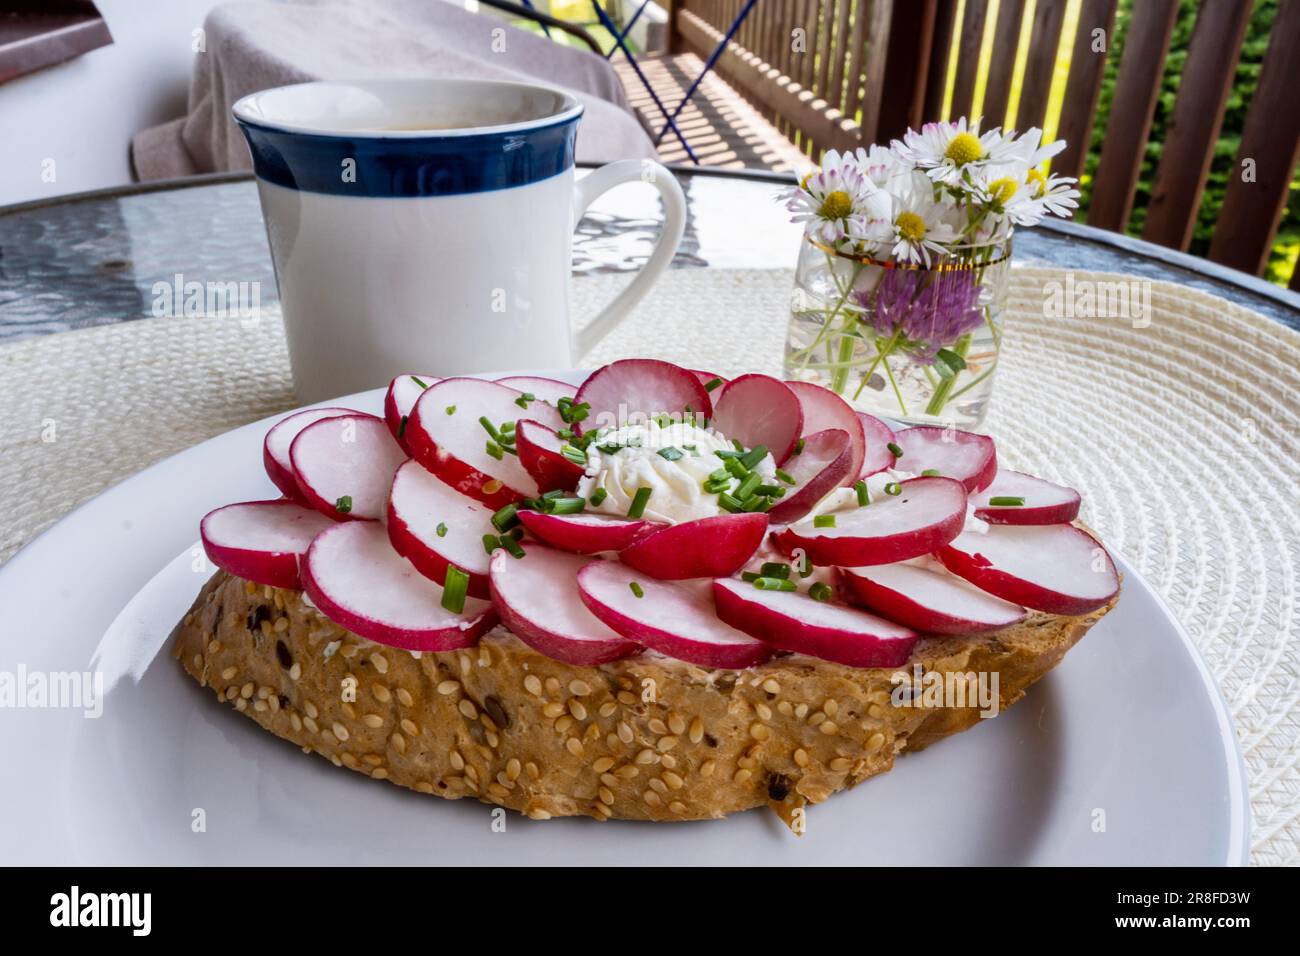 Bread garnished with radish on white plate, cup of coffee, flowers on table, outdoor. Breakfast or snack. Stock Photo